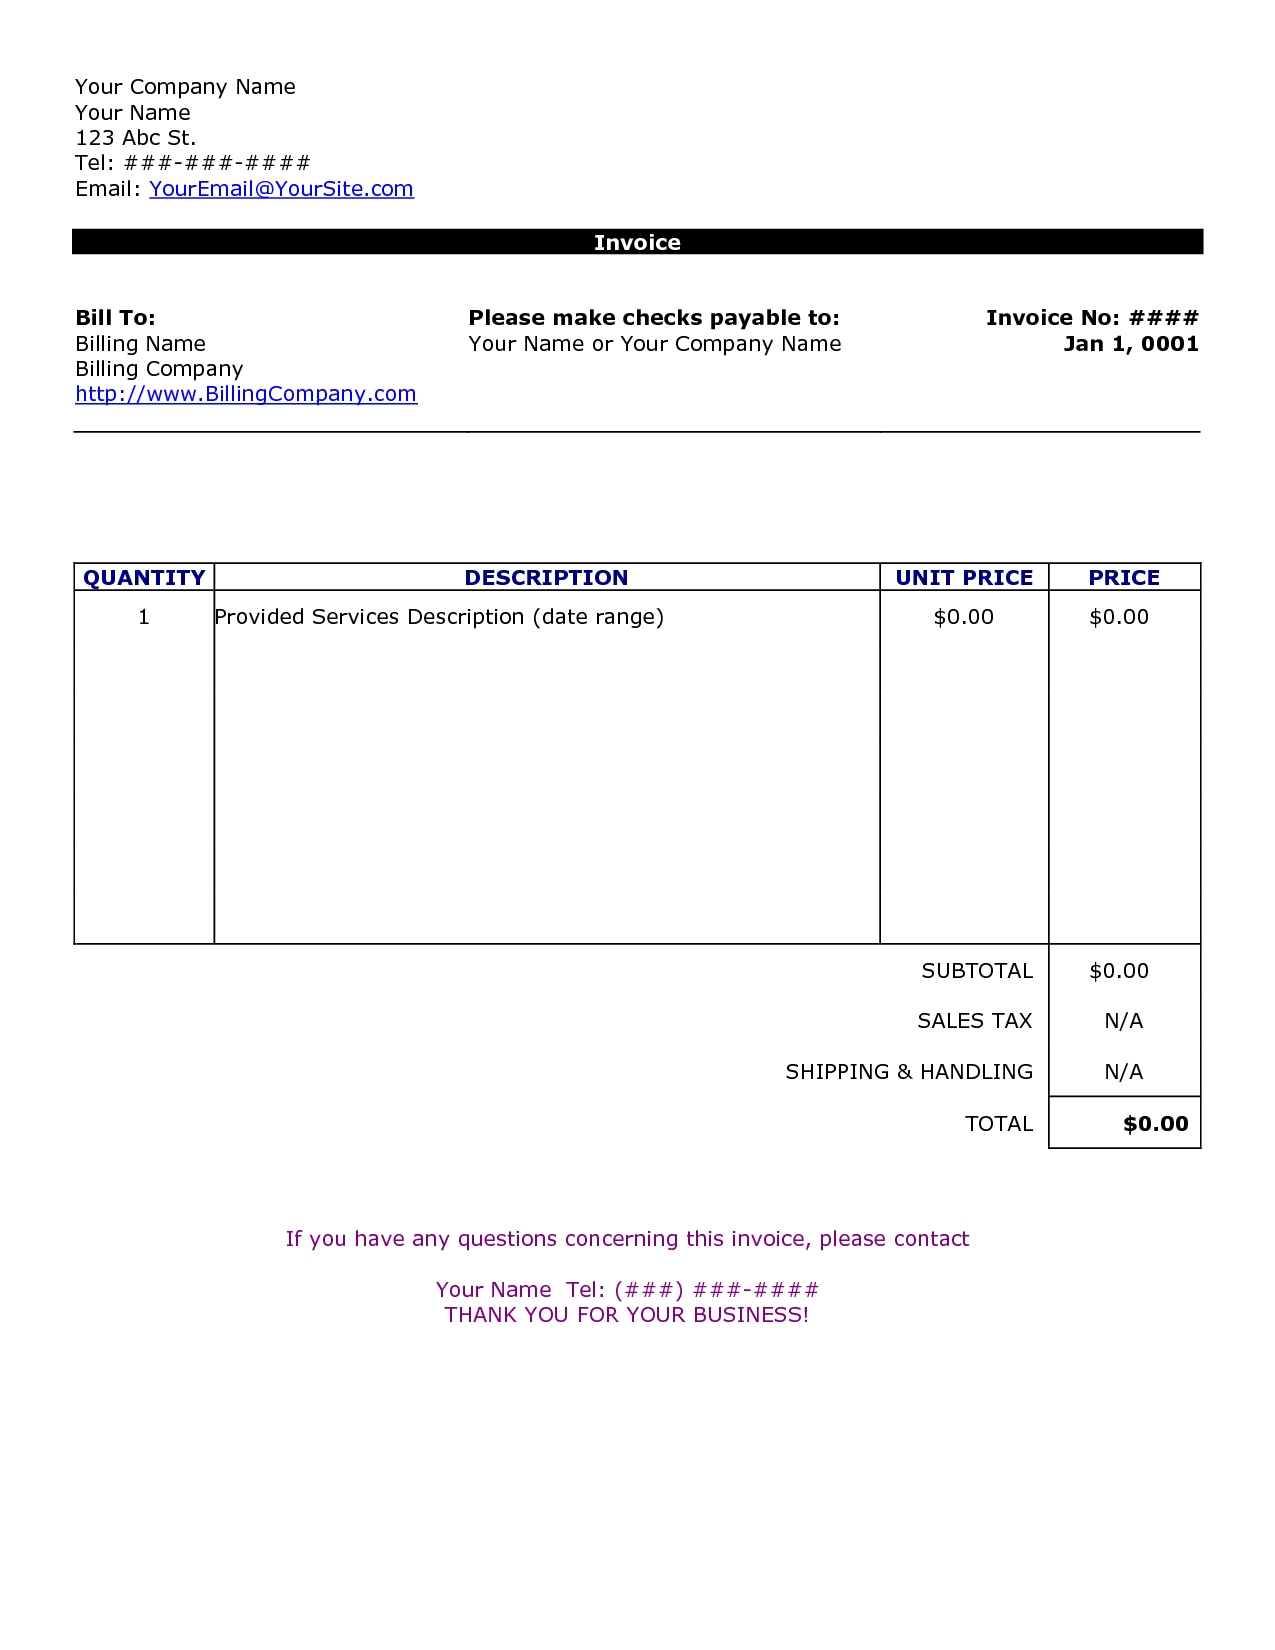 word-document-invoice-template-invoice-example